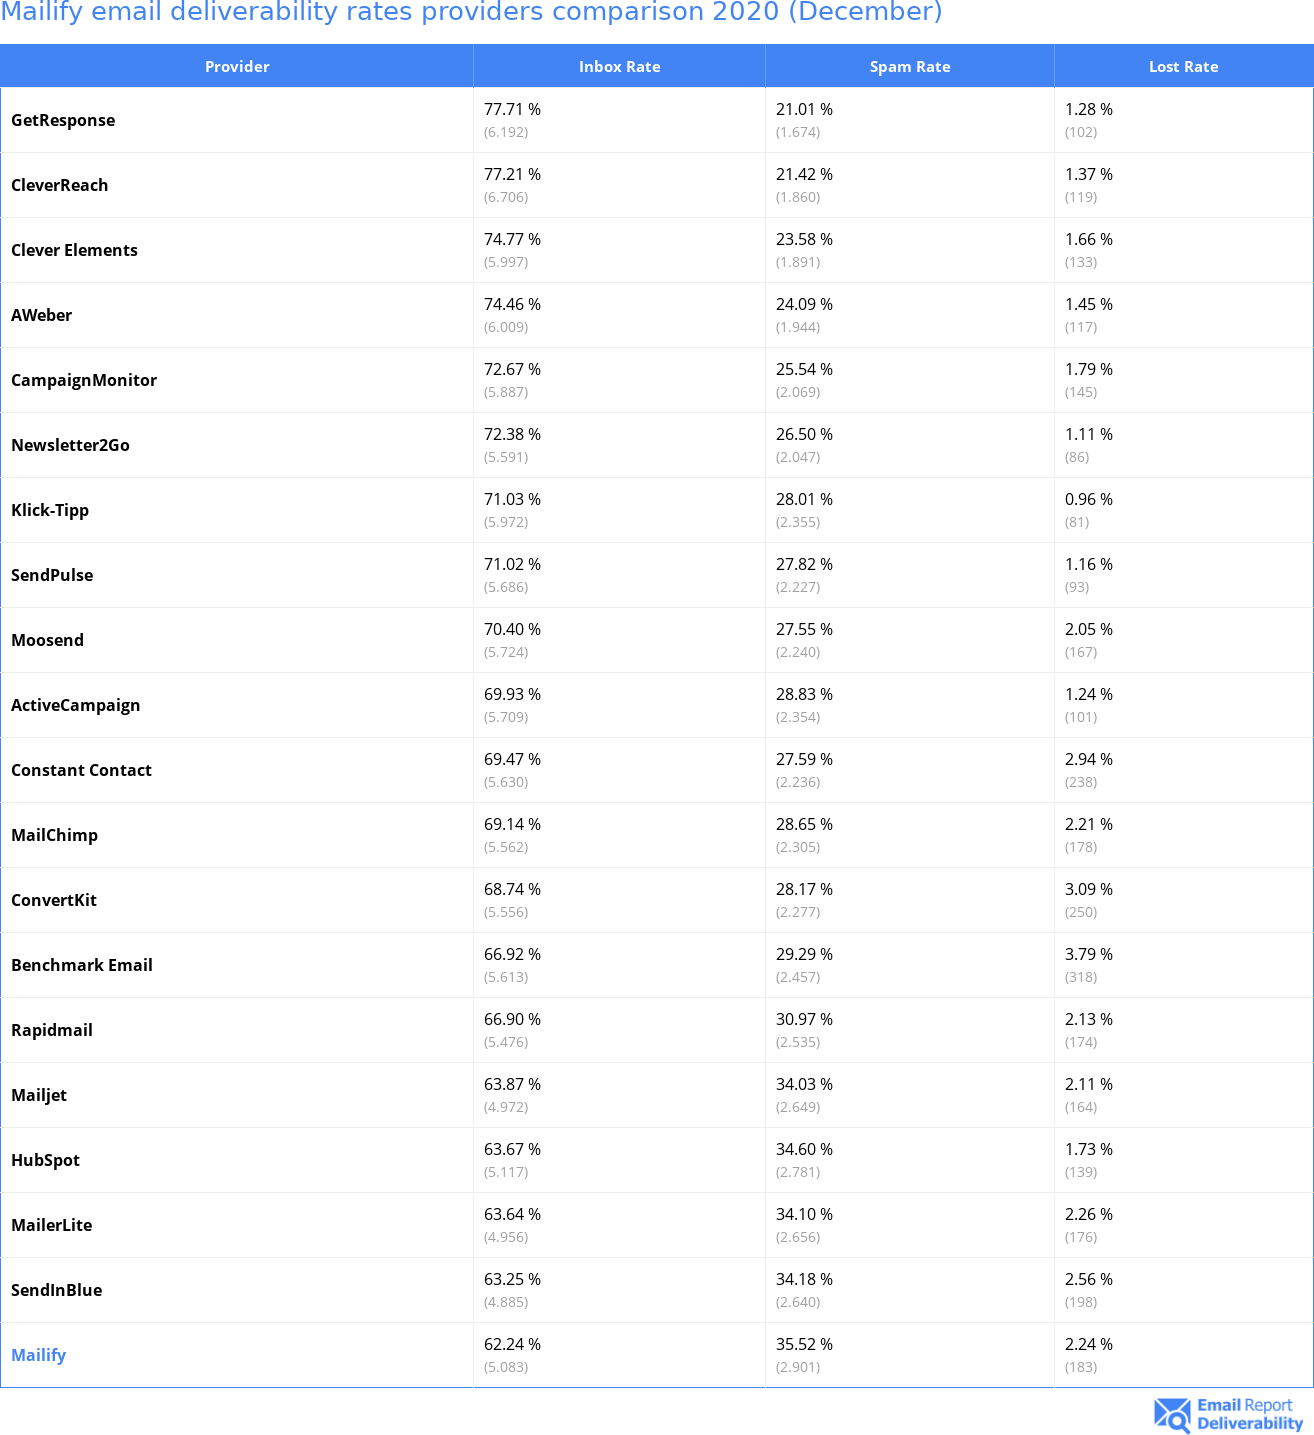 Mailify email deliverability rates providers comparison 2020 (December)